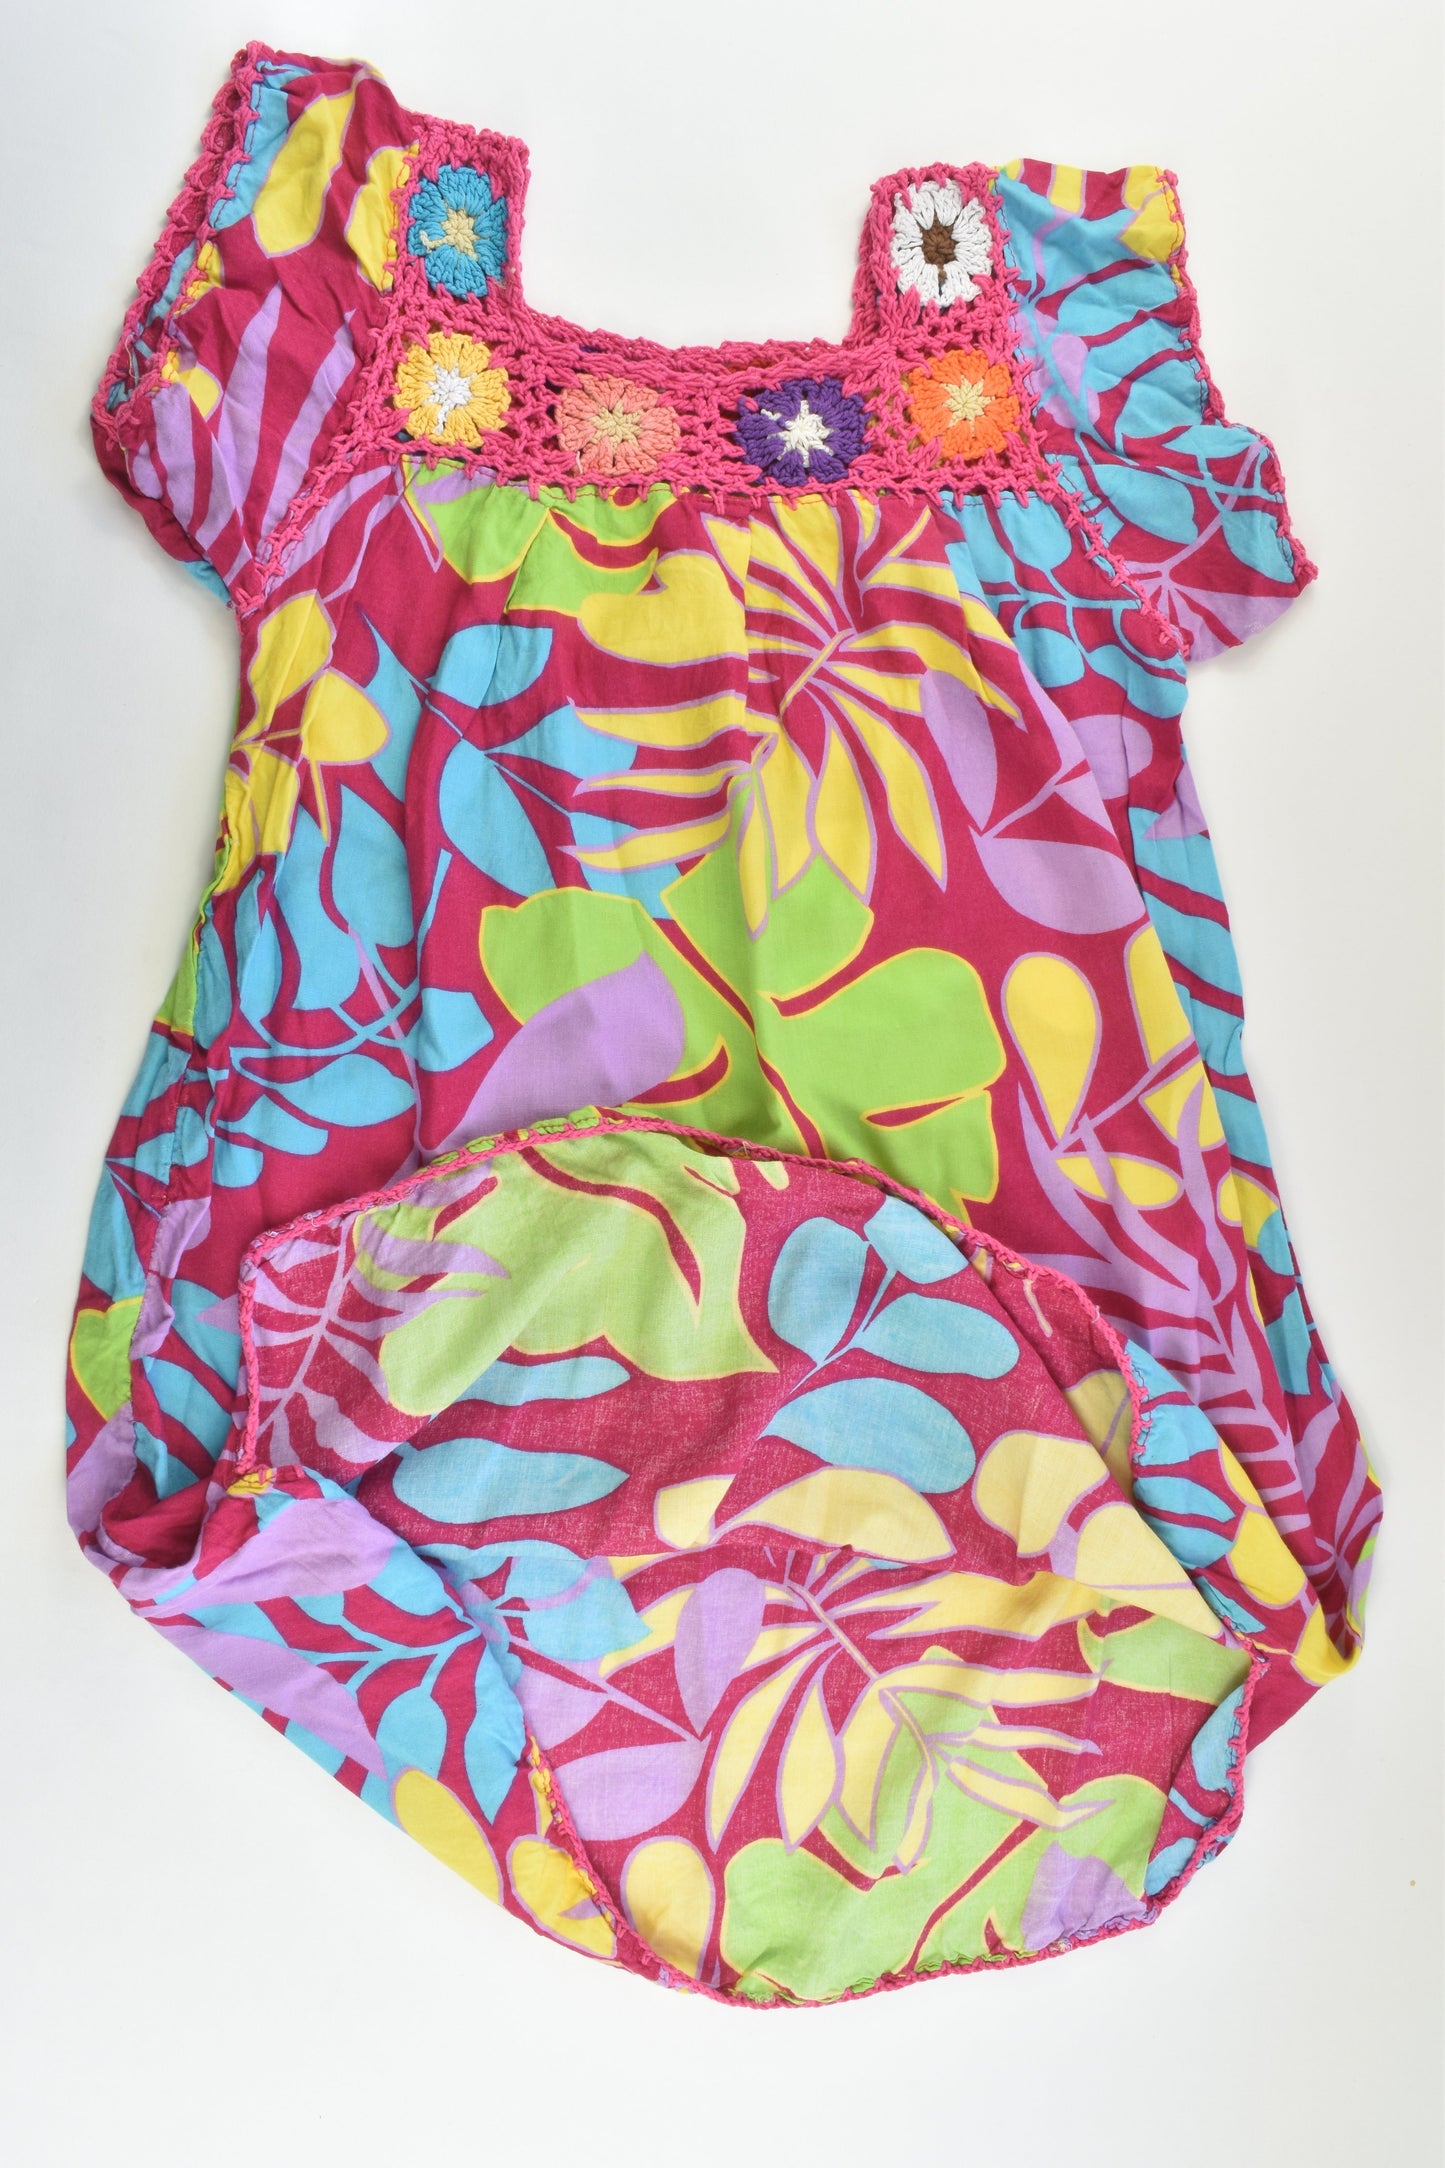 Handmade Size approx 6-7 Colourful Dress